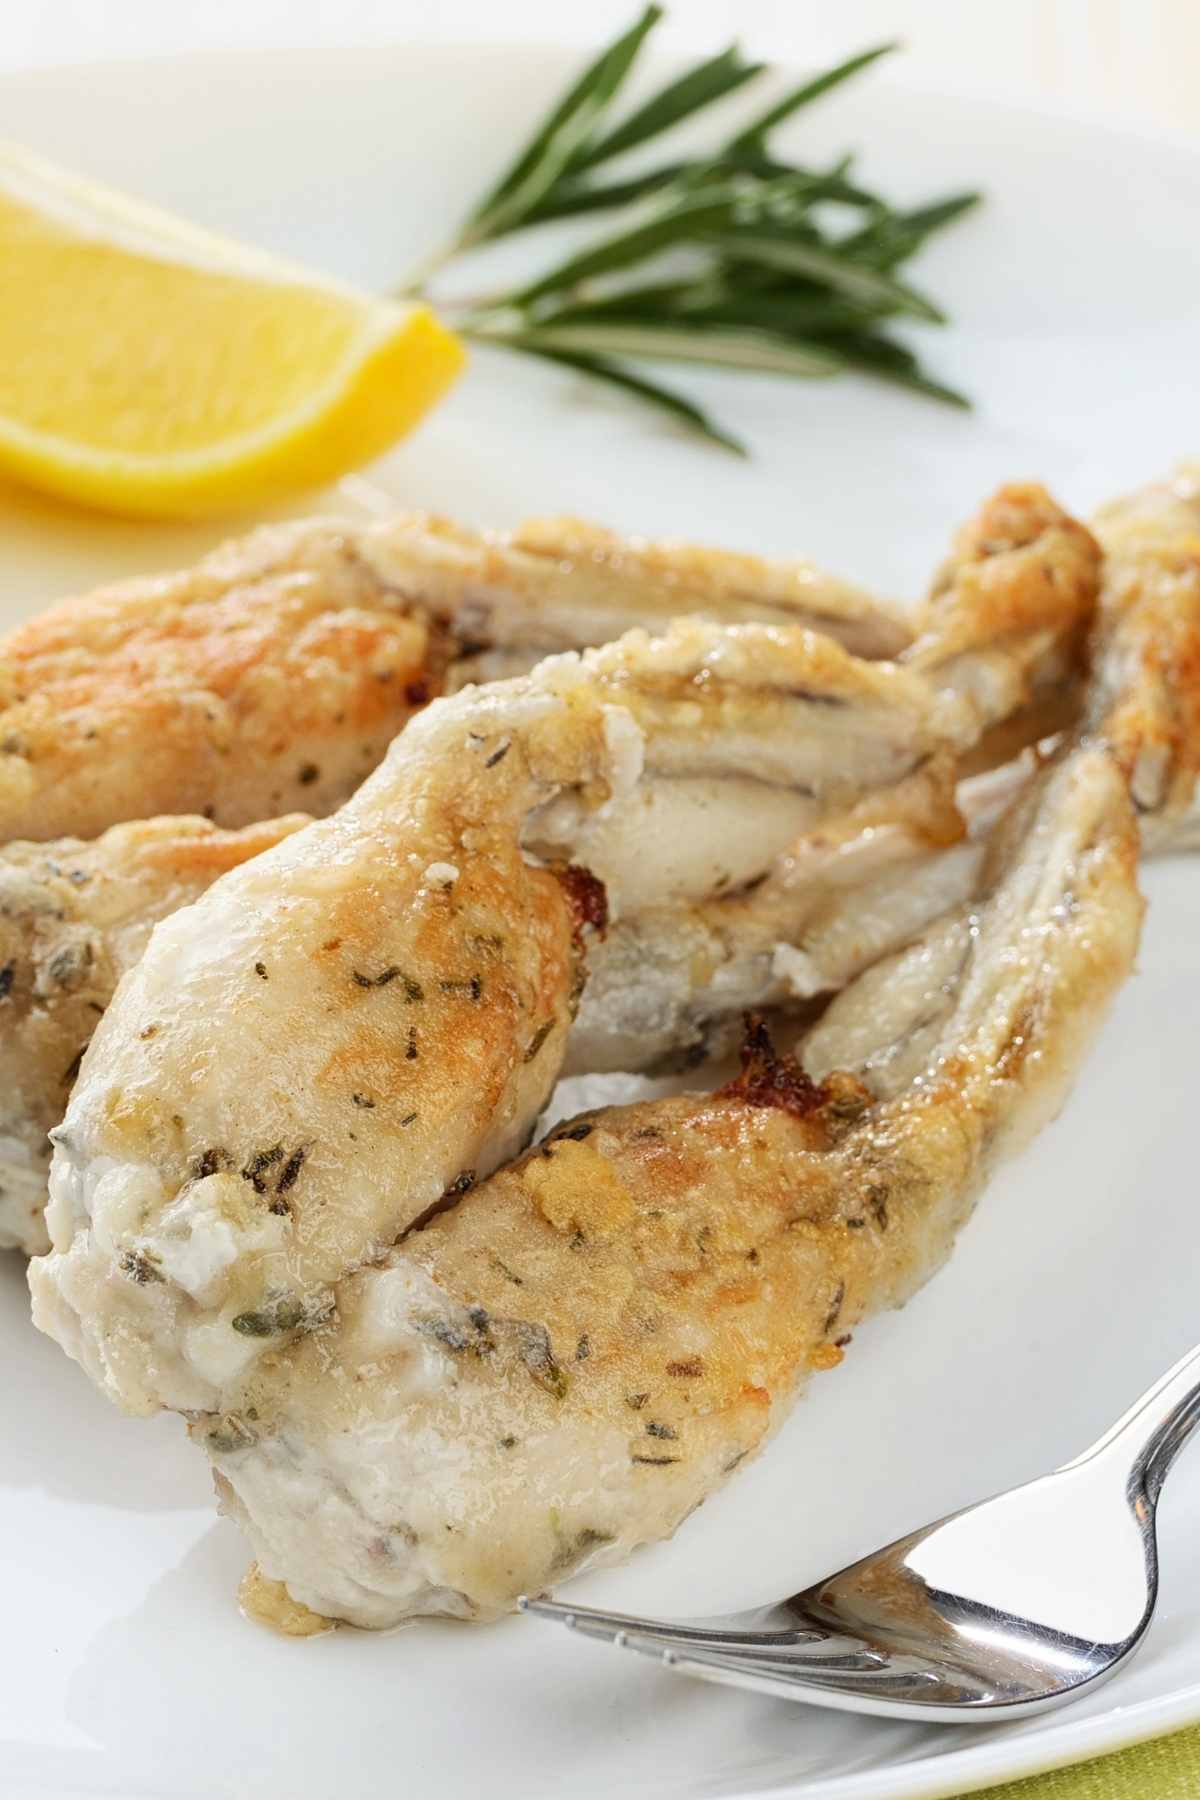 Crispy on the outside and tender on the inside, these fried frog legs are a perfect appetizer that’s easy to make and sure to impress. The secret is to coat the frog with a thin layer of flour before frying, resulting in a succulent texture and unbelievable flavor. Within less than 30 minutes, you’ll be serving up a plate of tender and flavorful frog legs.